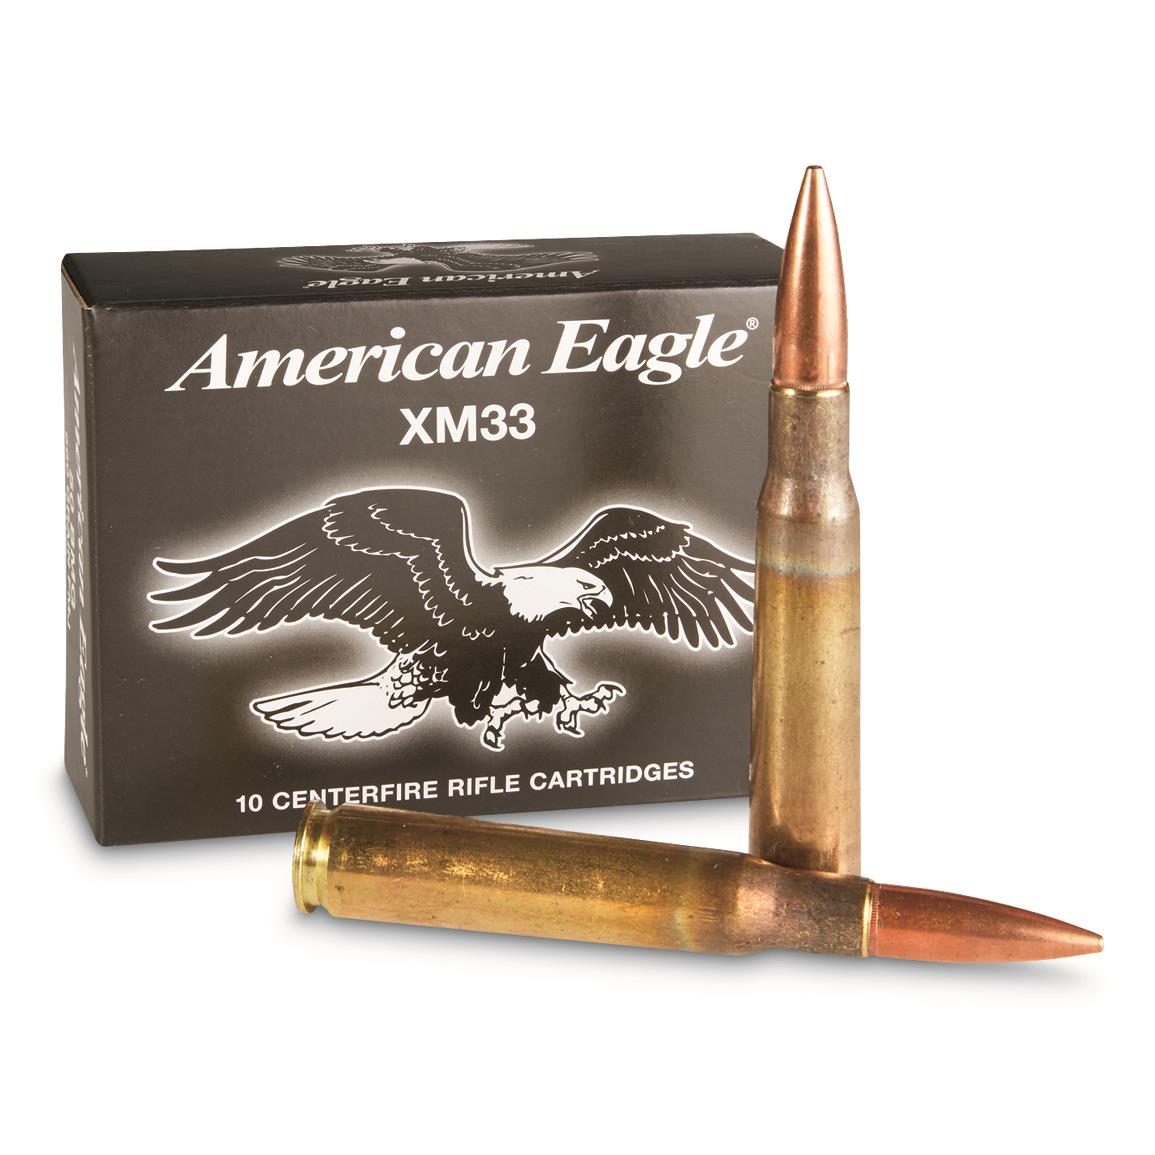 American Eagle 50 Cal Fmj 660 Grain 10 Rounds 149506 50 Bmg Ammo At Sportsman S Guide - 50 bmg stand roblox